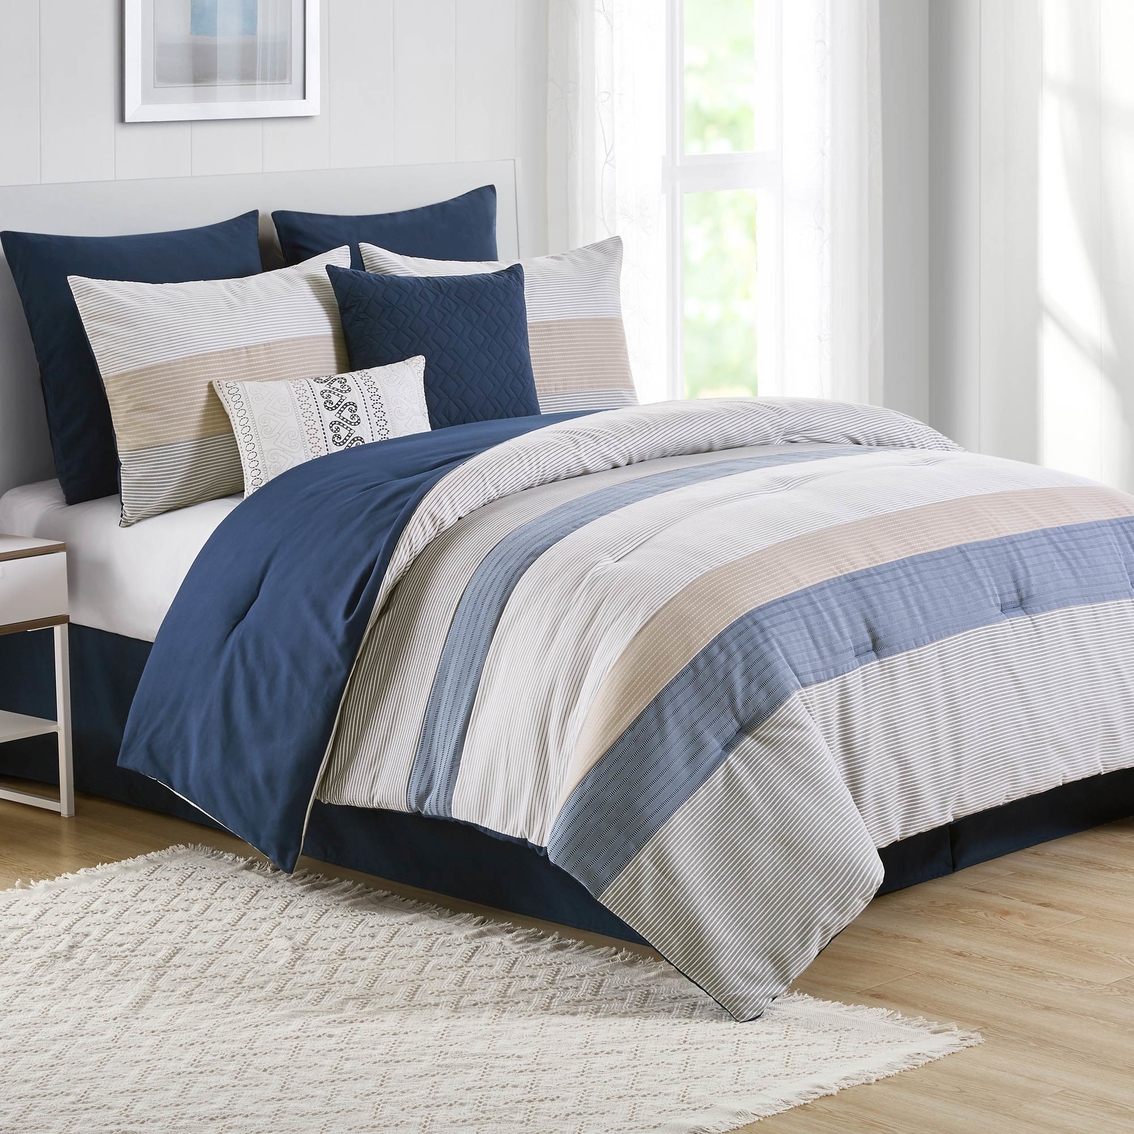 VCNY Home Drover Stripe 8 Pc. Comforter Set - Image 2 of 4